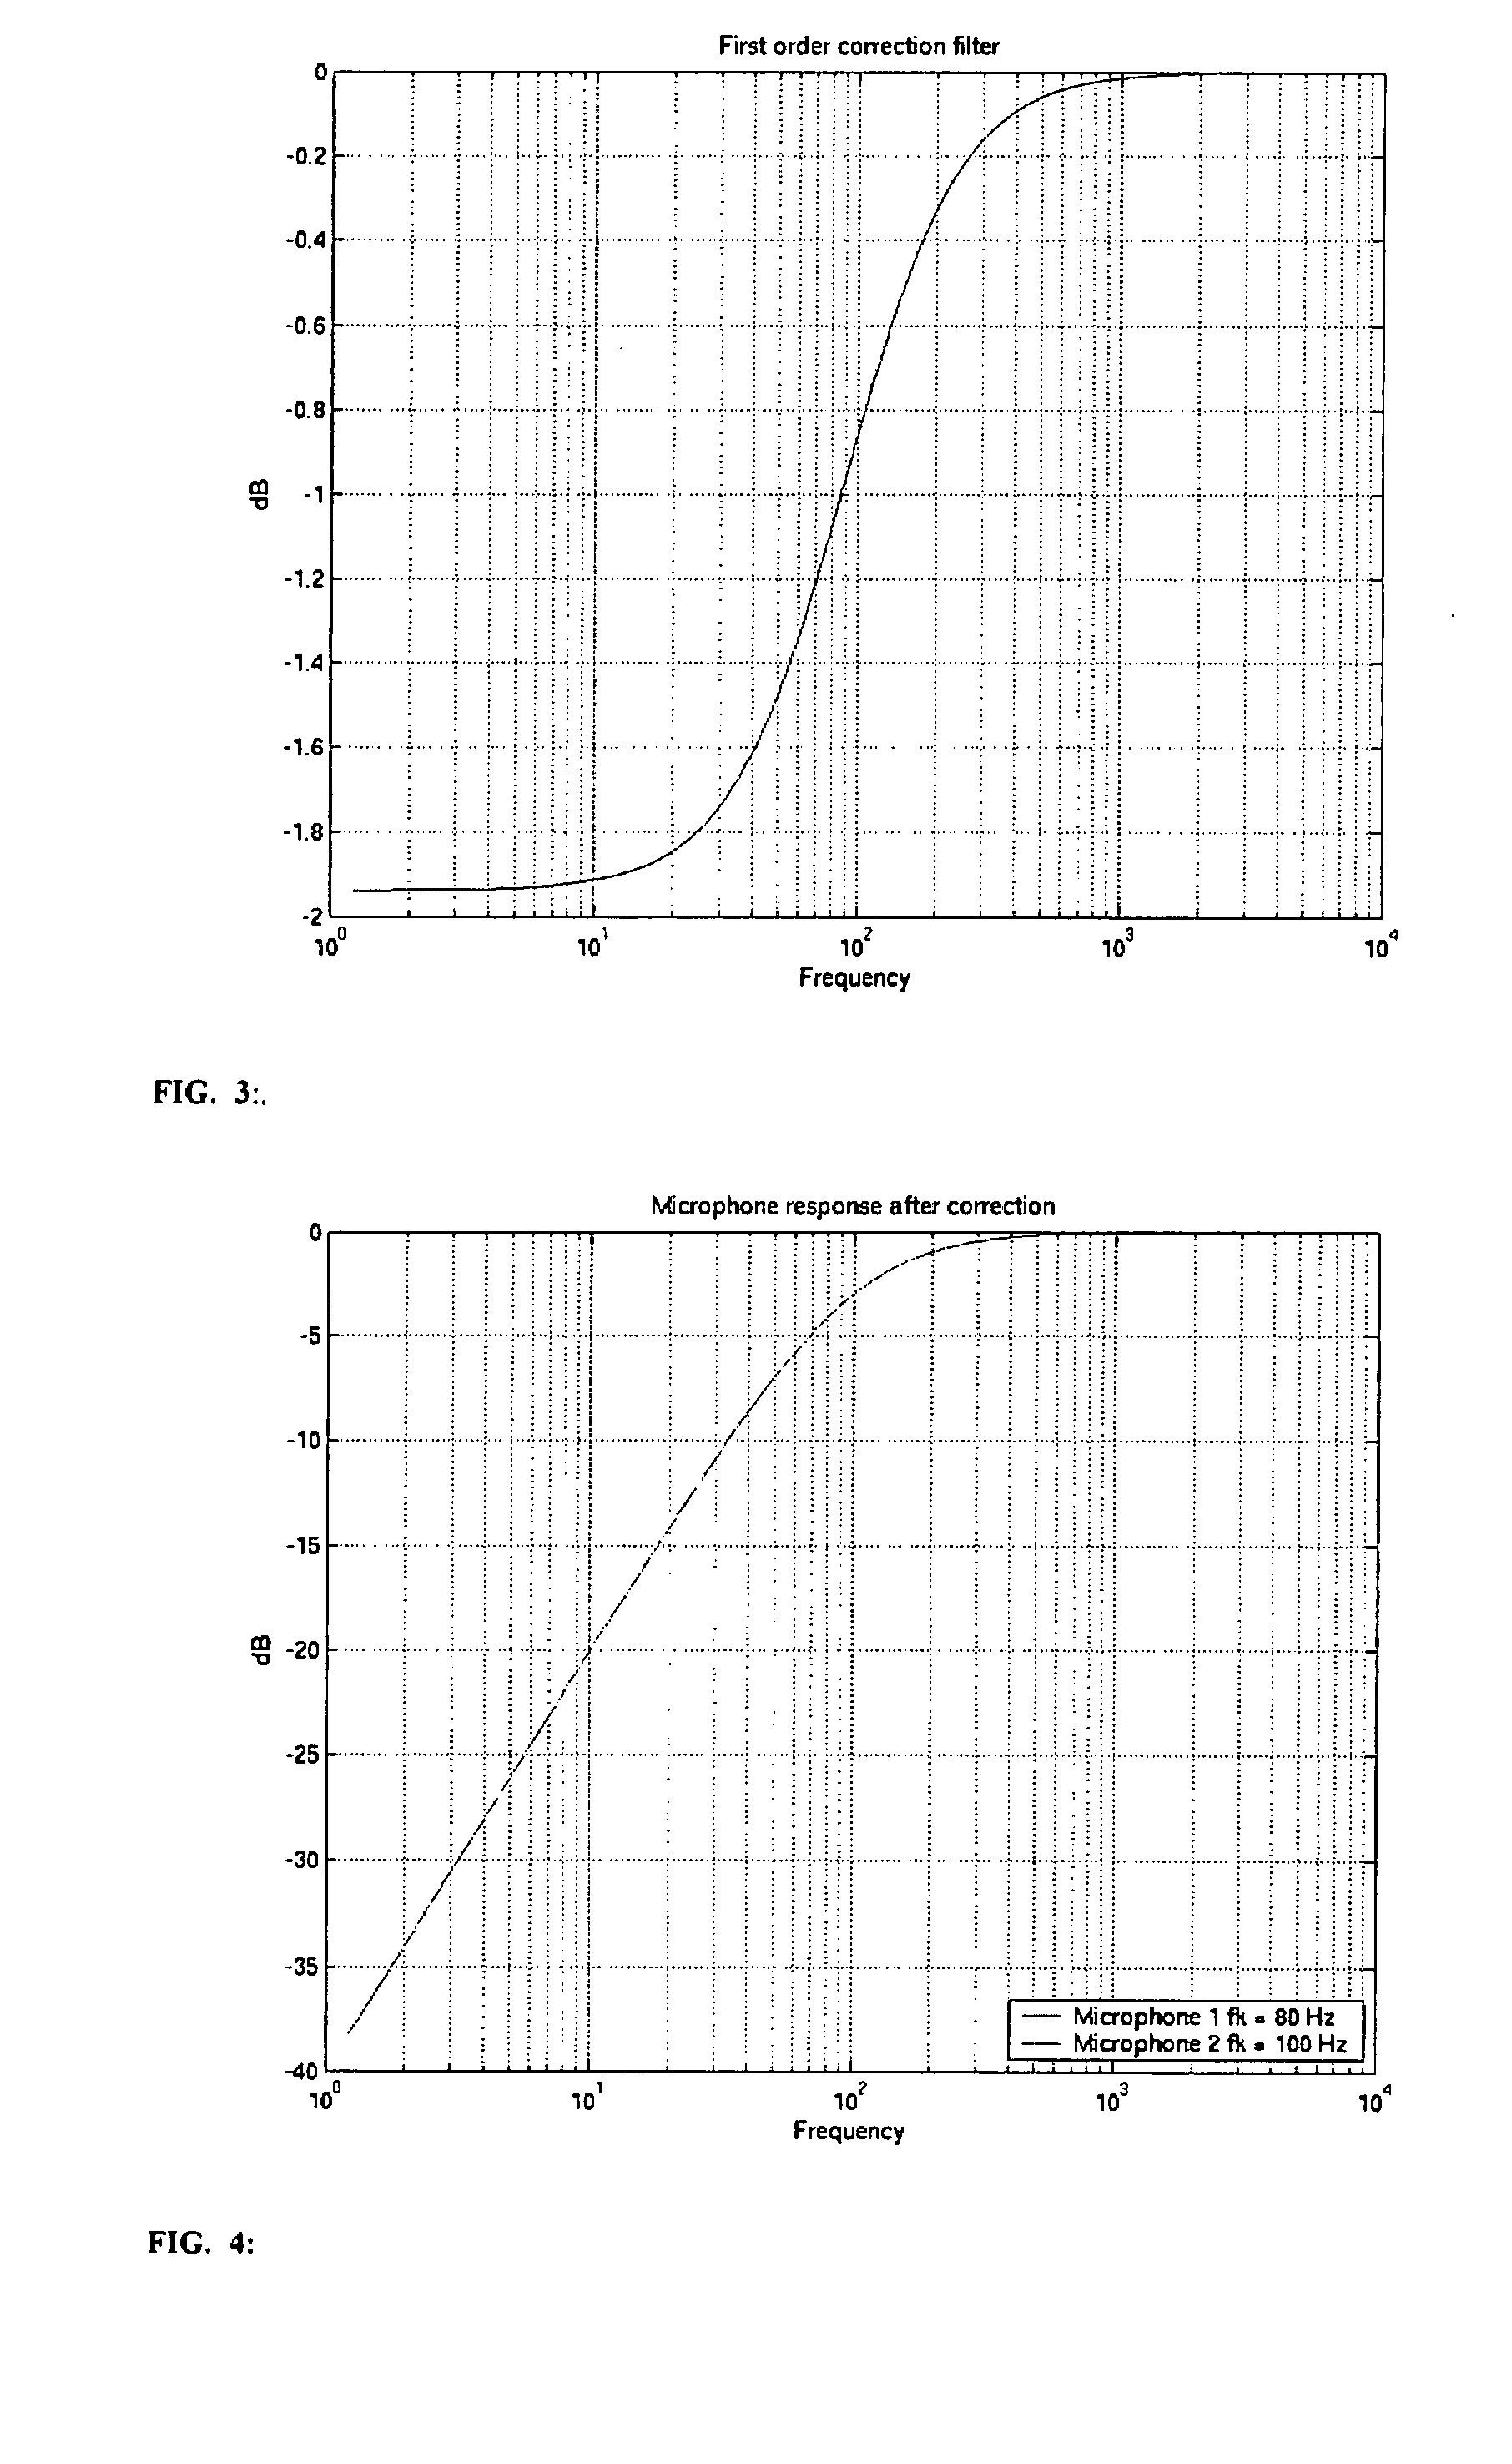 Low Frequency Phase Matching for Microphones